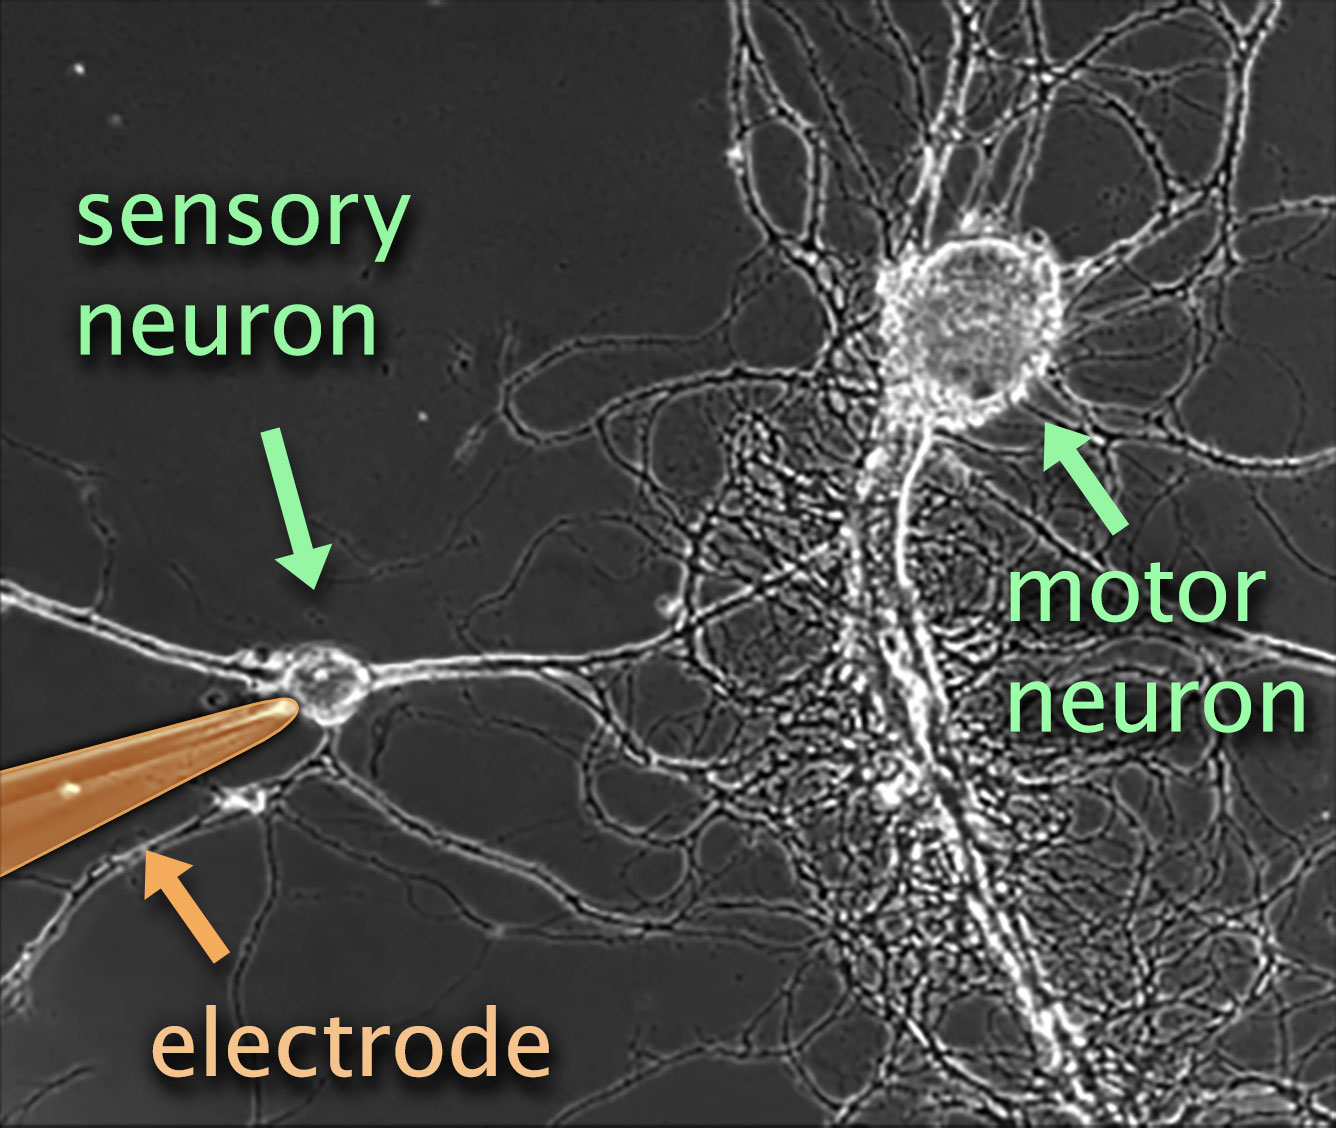 Aplysia neurons with electrode placed in a sensory neuron, which is connected by a synapse to the motor neuron.